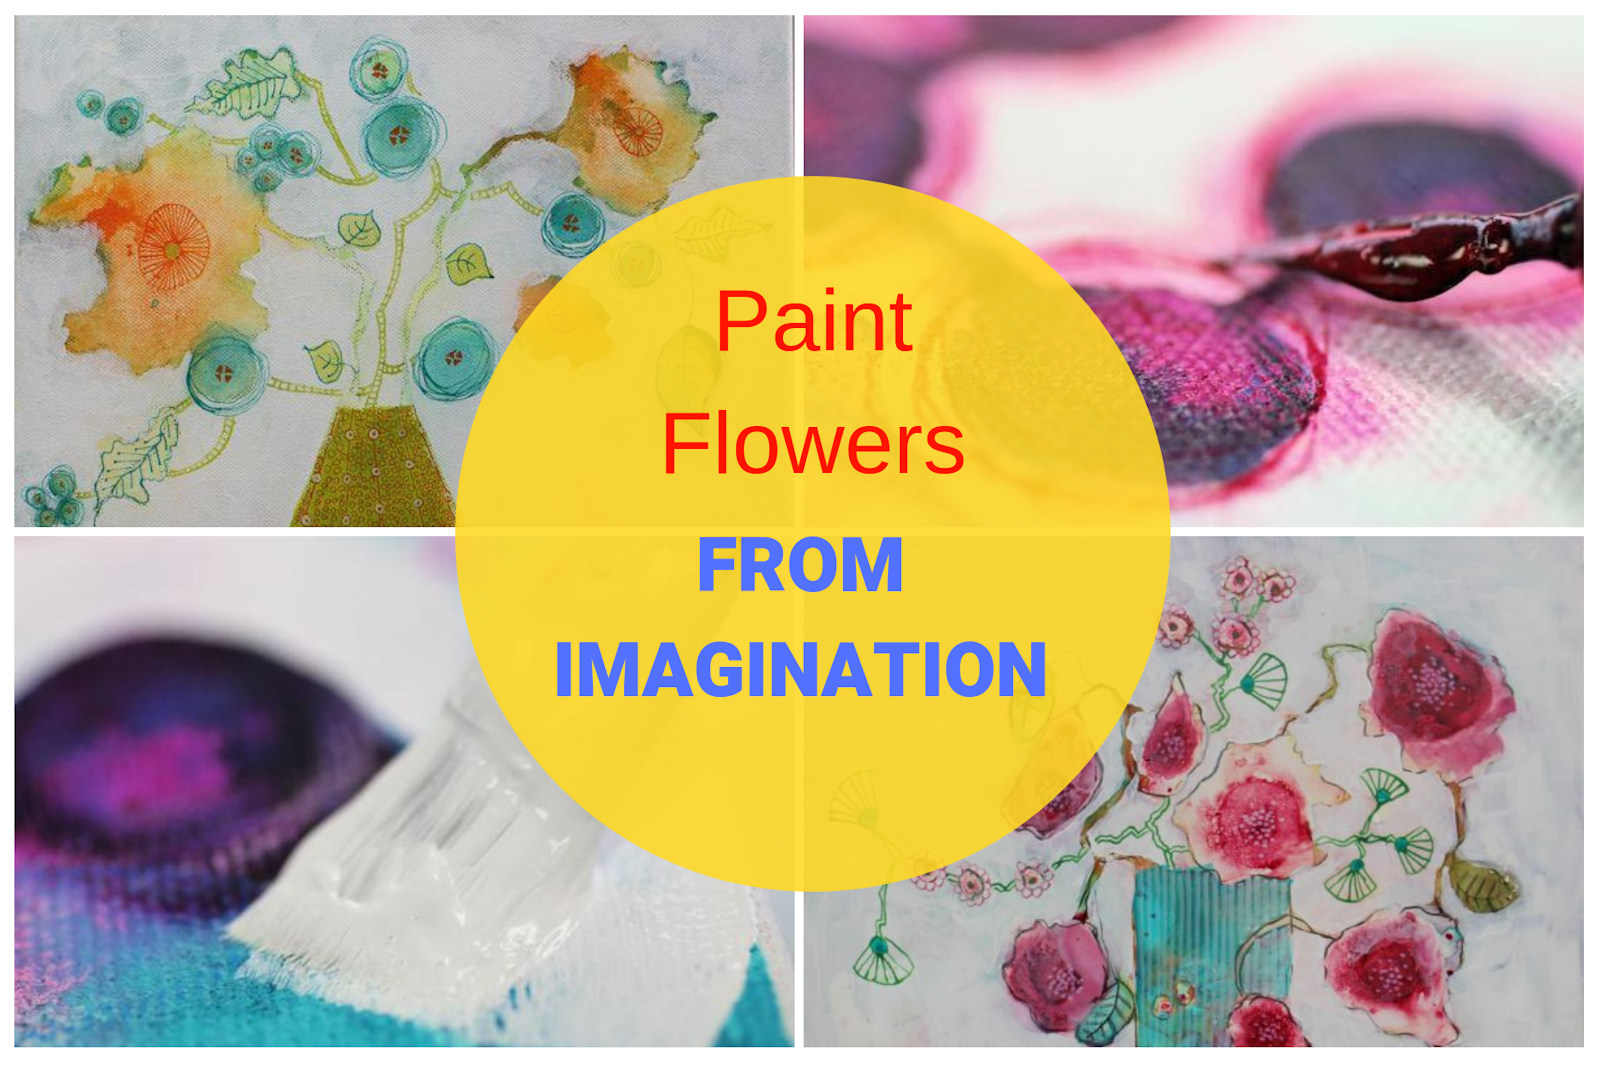 Online art class: Painting Flowers from imagination in mixed media